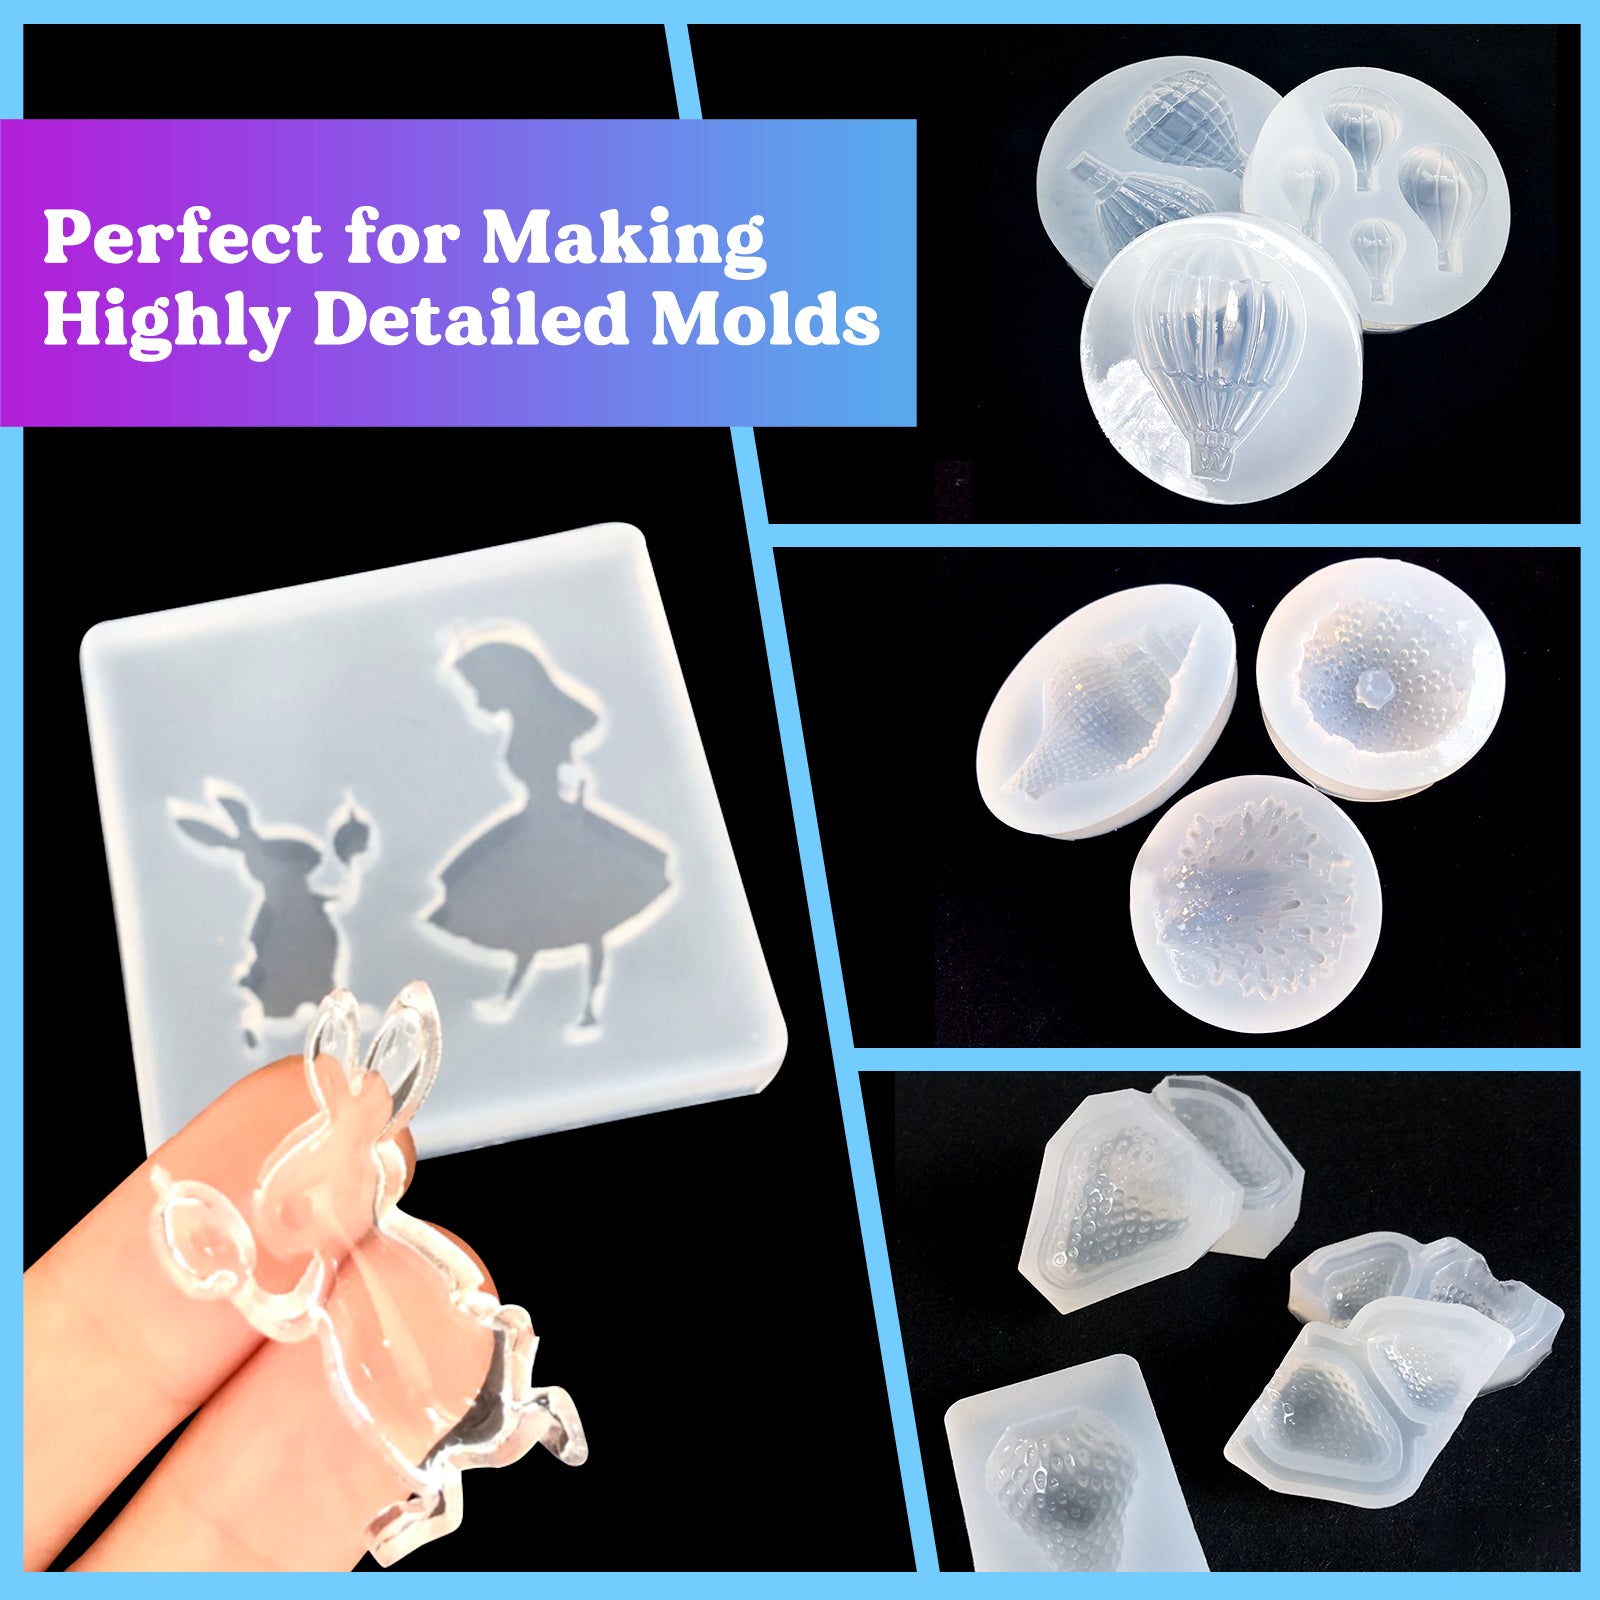 LET'S RESIN Silicone Putty,1LB/40A Silicone Mold Making Kit,  Non-Toxic,Strong&Flexible, Easy 1:1 Mixing Ratio for Reusable Silicone  Molds, Resin